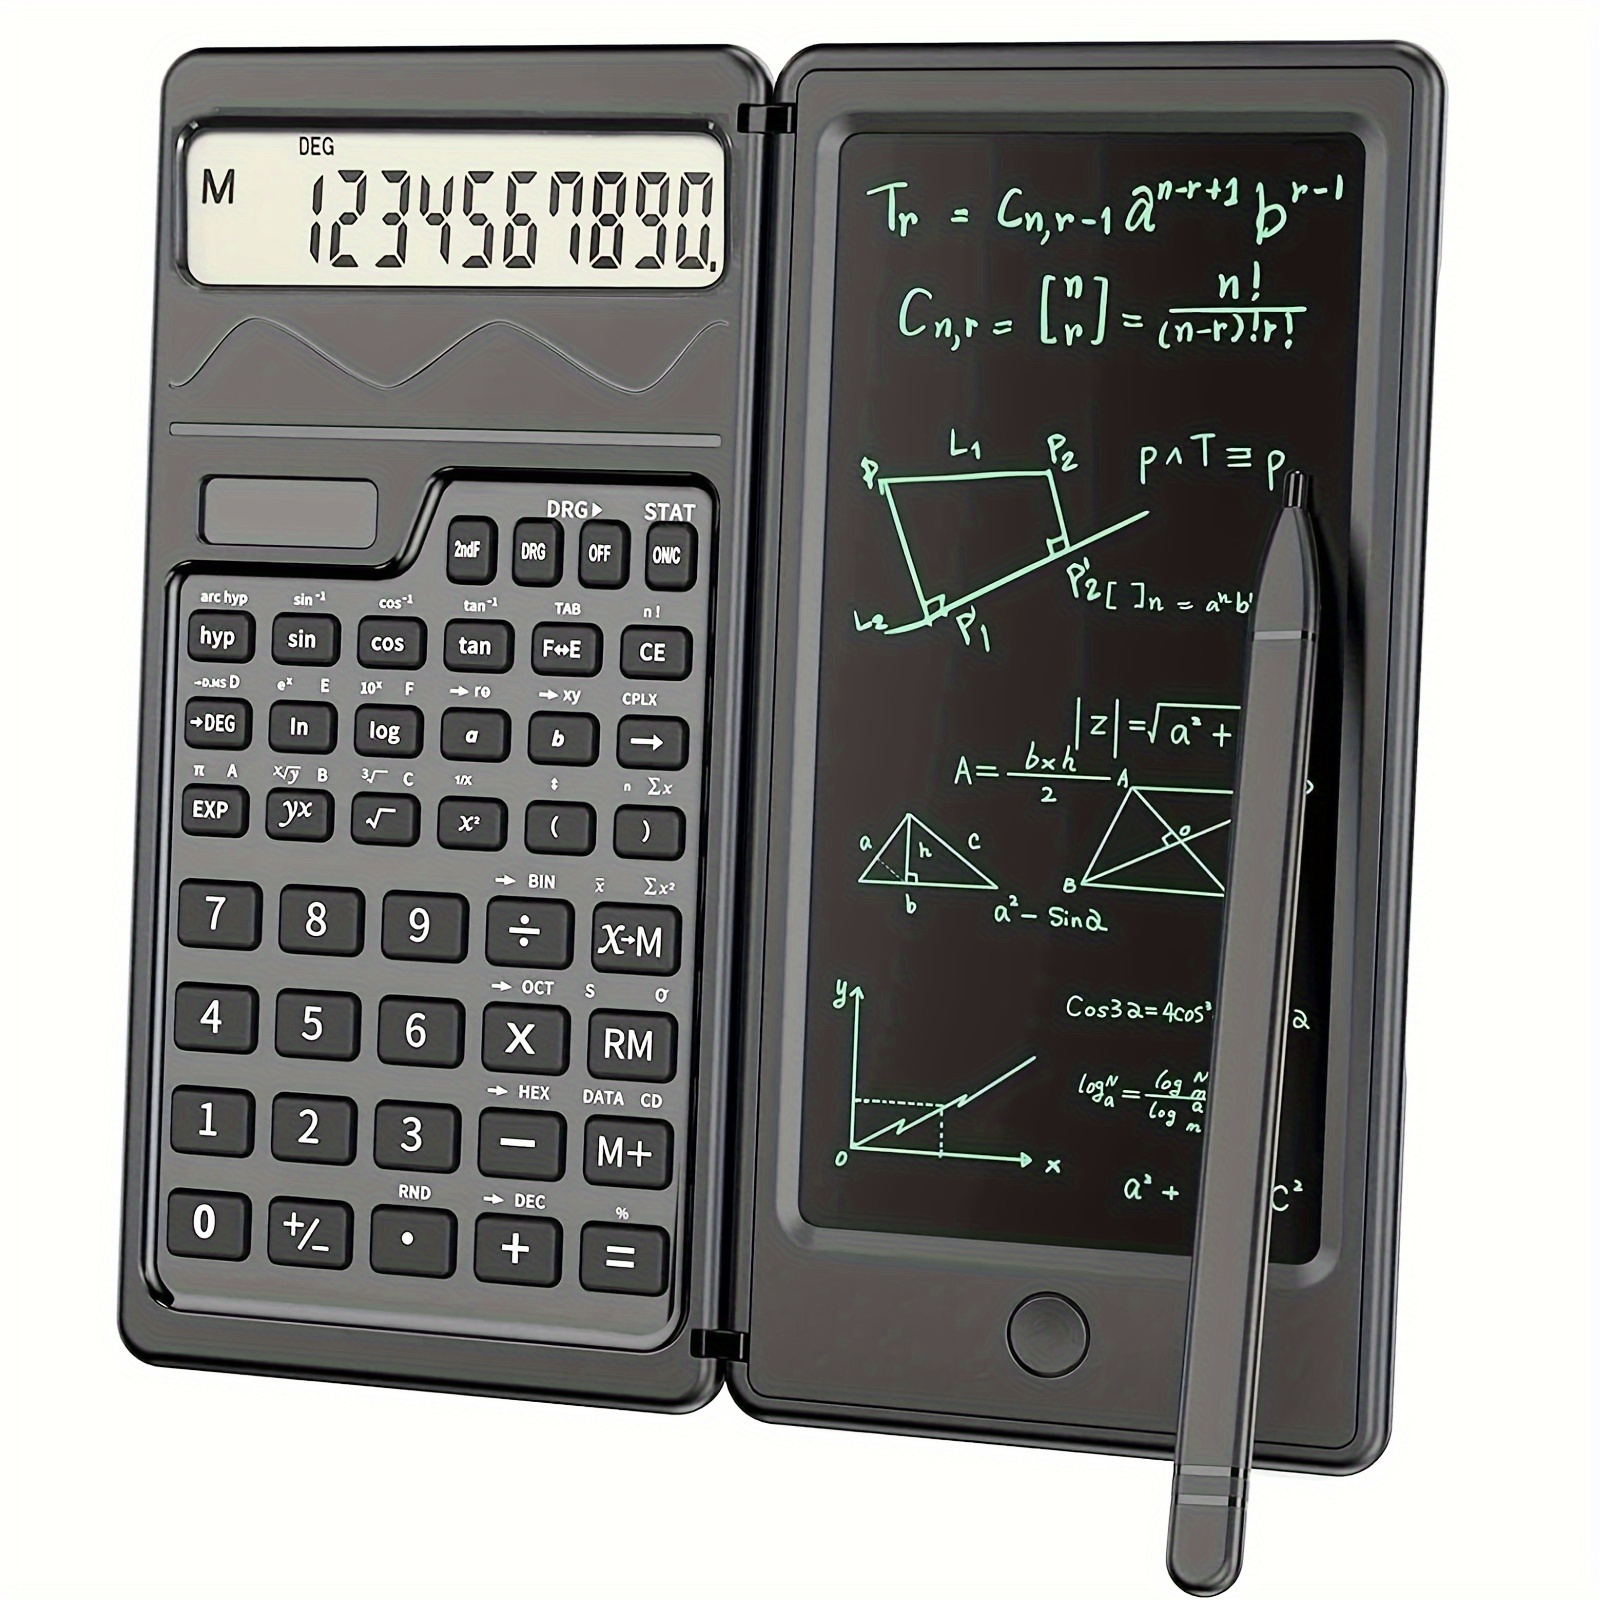 

Scientific Calculators 10-digit Lcd Display Foldable Calculator With Handwriting Board, Solar And Battery Dual Power Supply For Teacher, Engineer